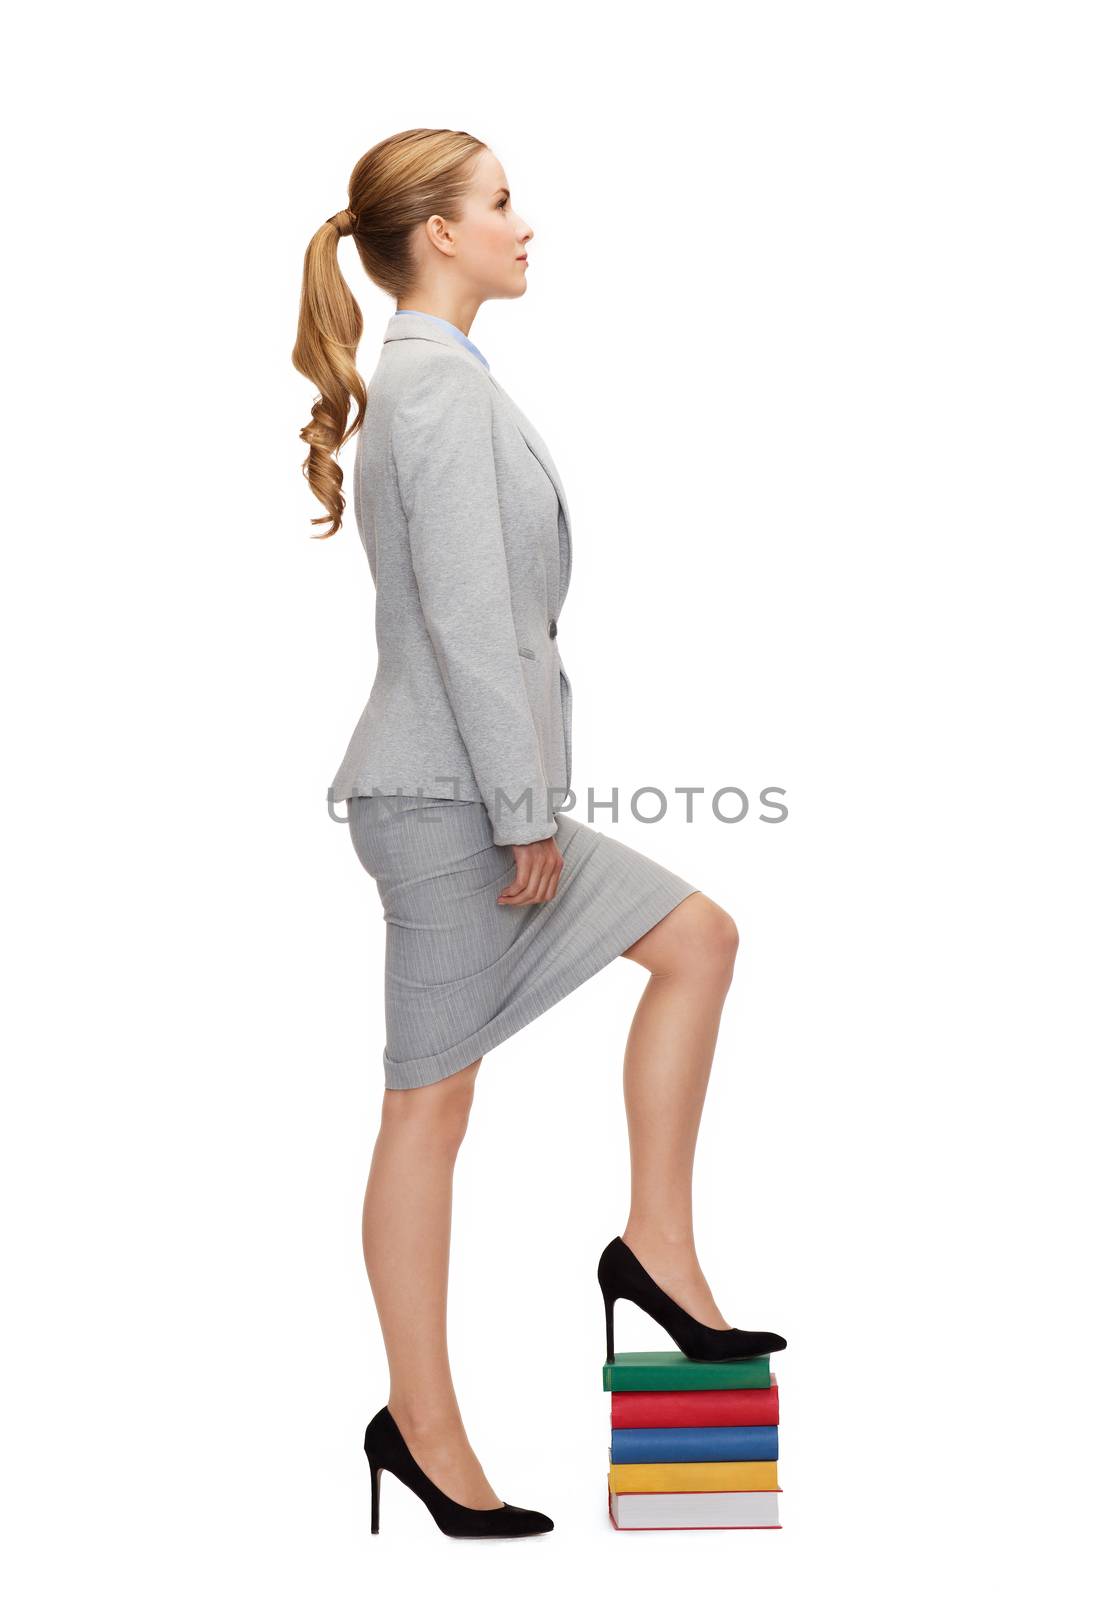 business and education concept - businesswoman stepping on pile of books